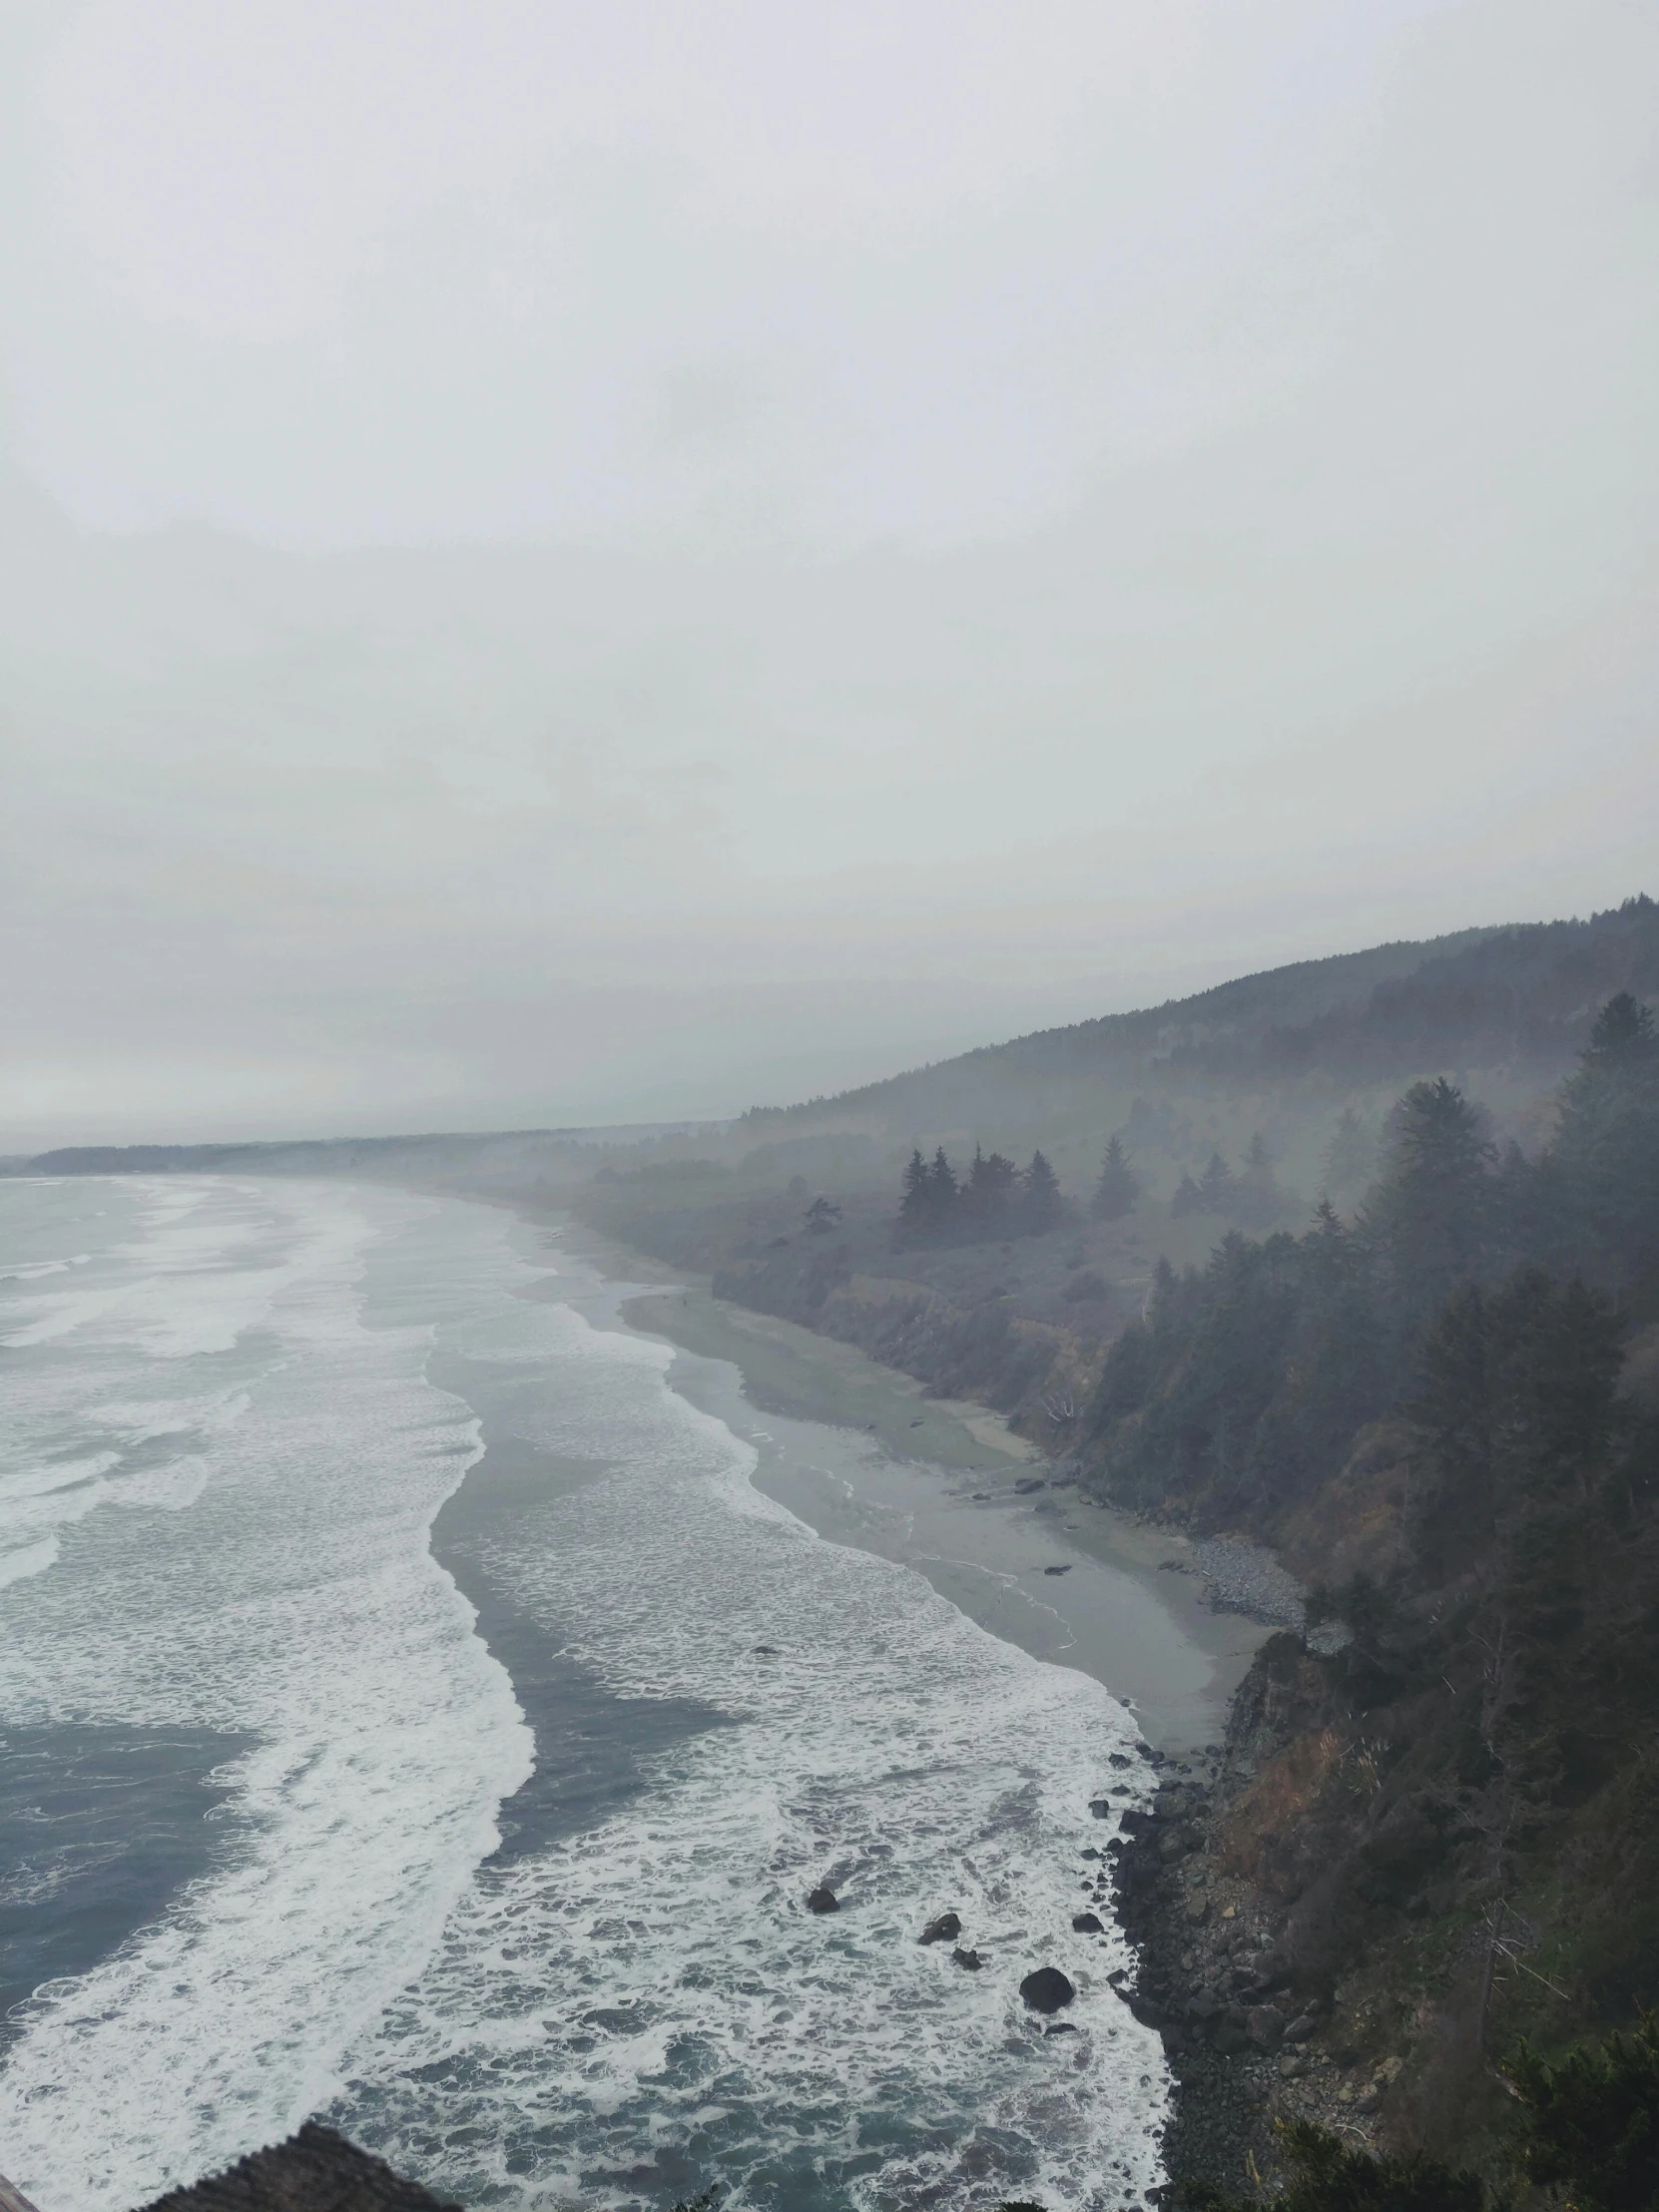 a view of the ocean from the top of a hill, foggy water, grey forest in the background, towering waves, depressing image